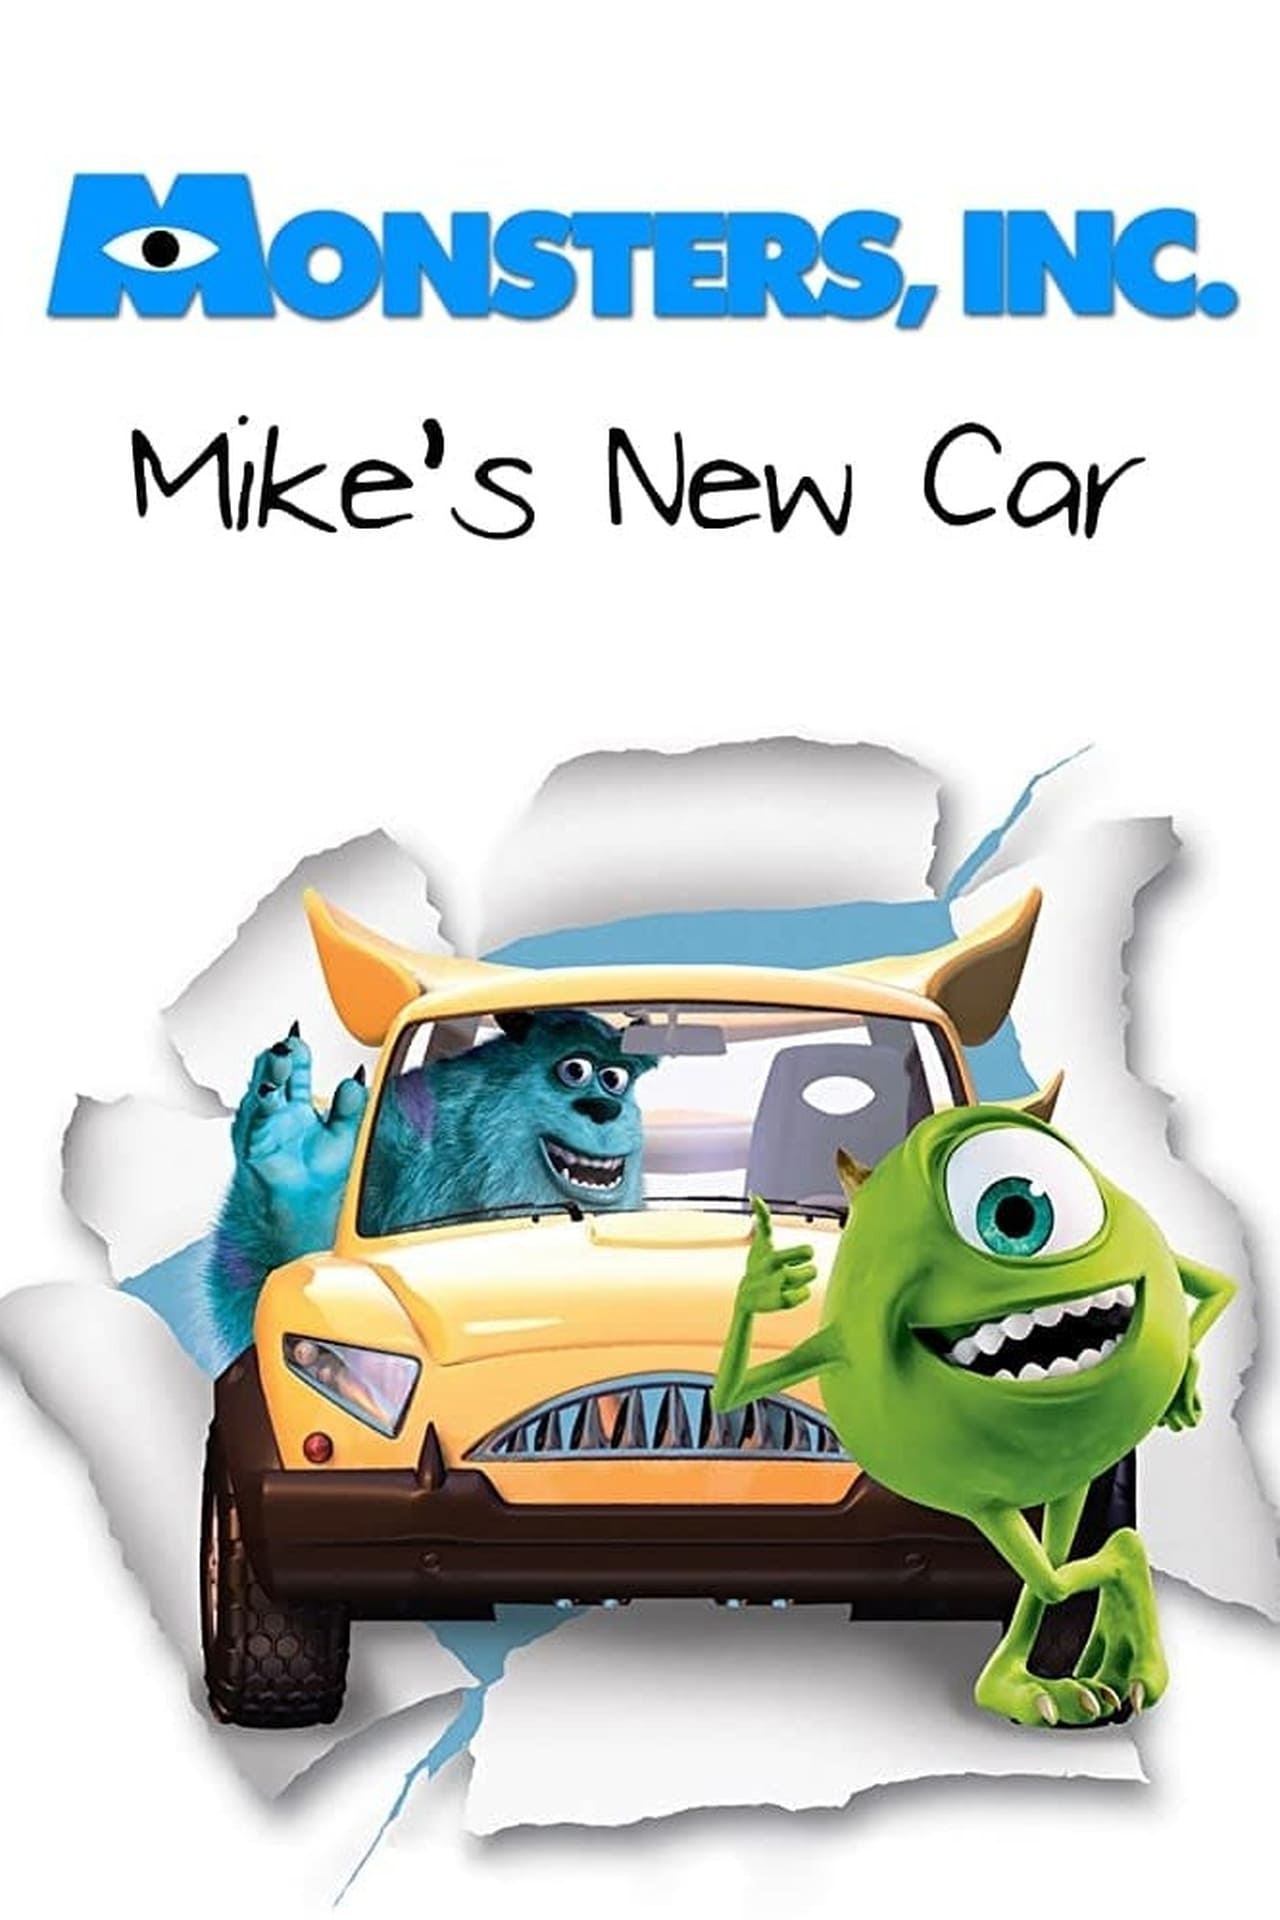 Mike's New Car wiki, synopsis, reviews, watch and download